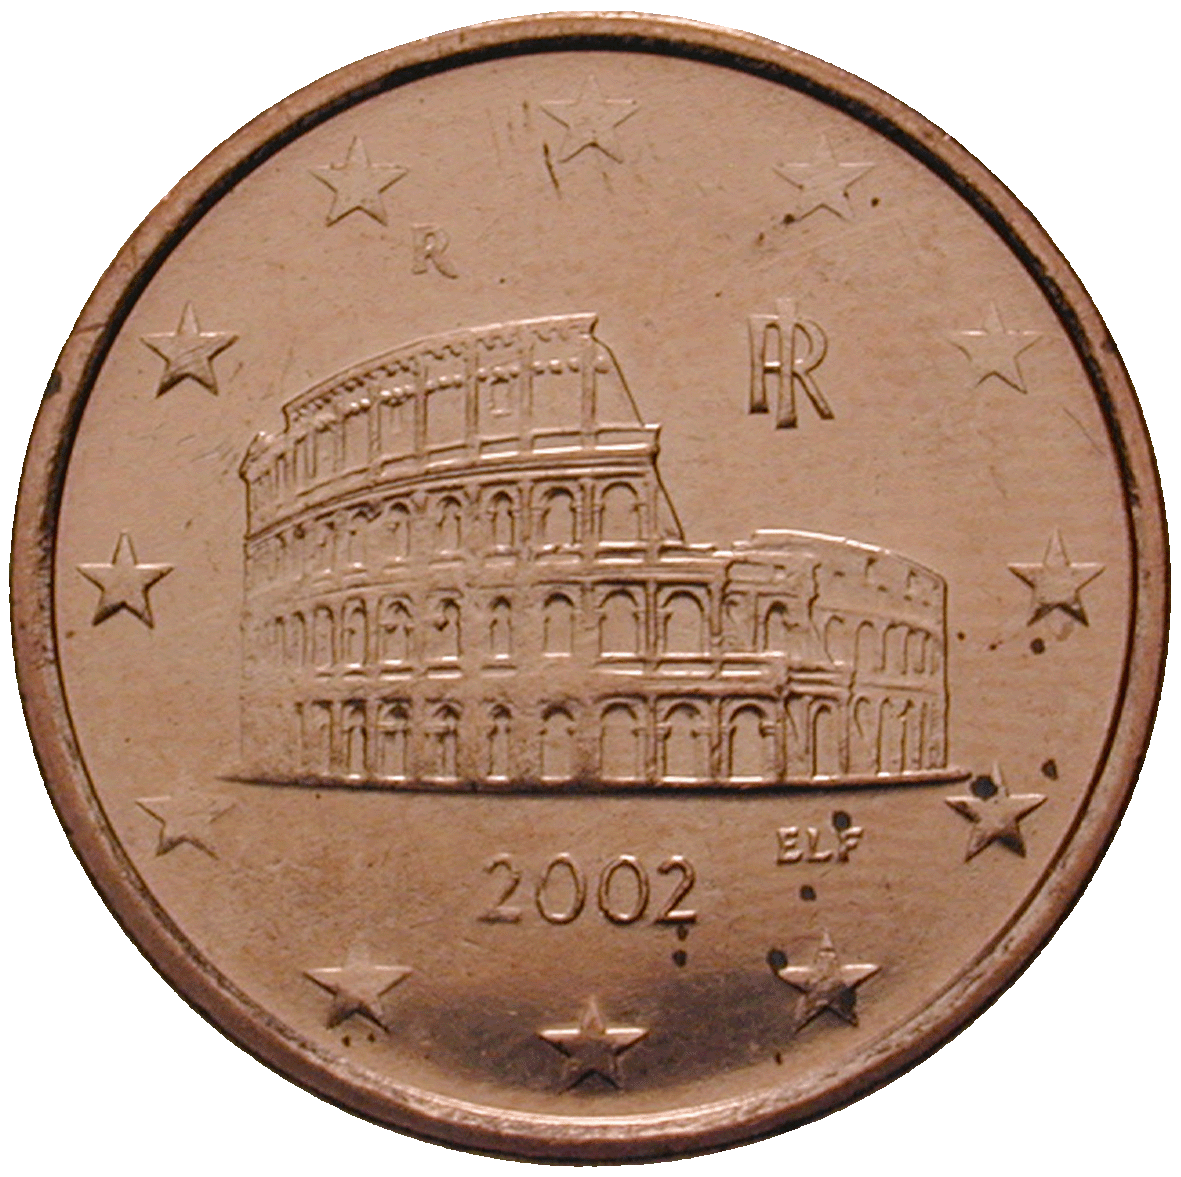 Republic of Italy, 5 Euro Cent 2002 (obverse)